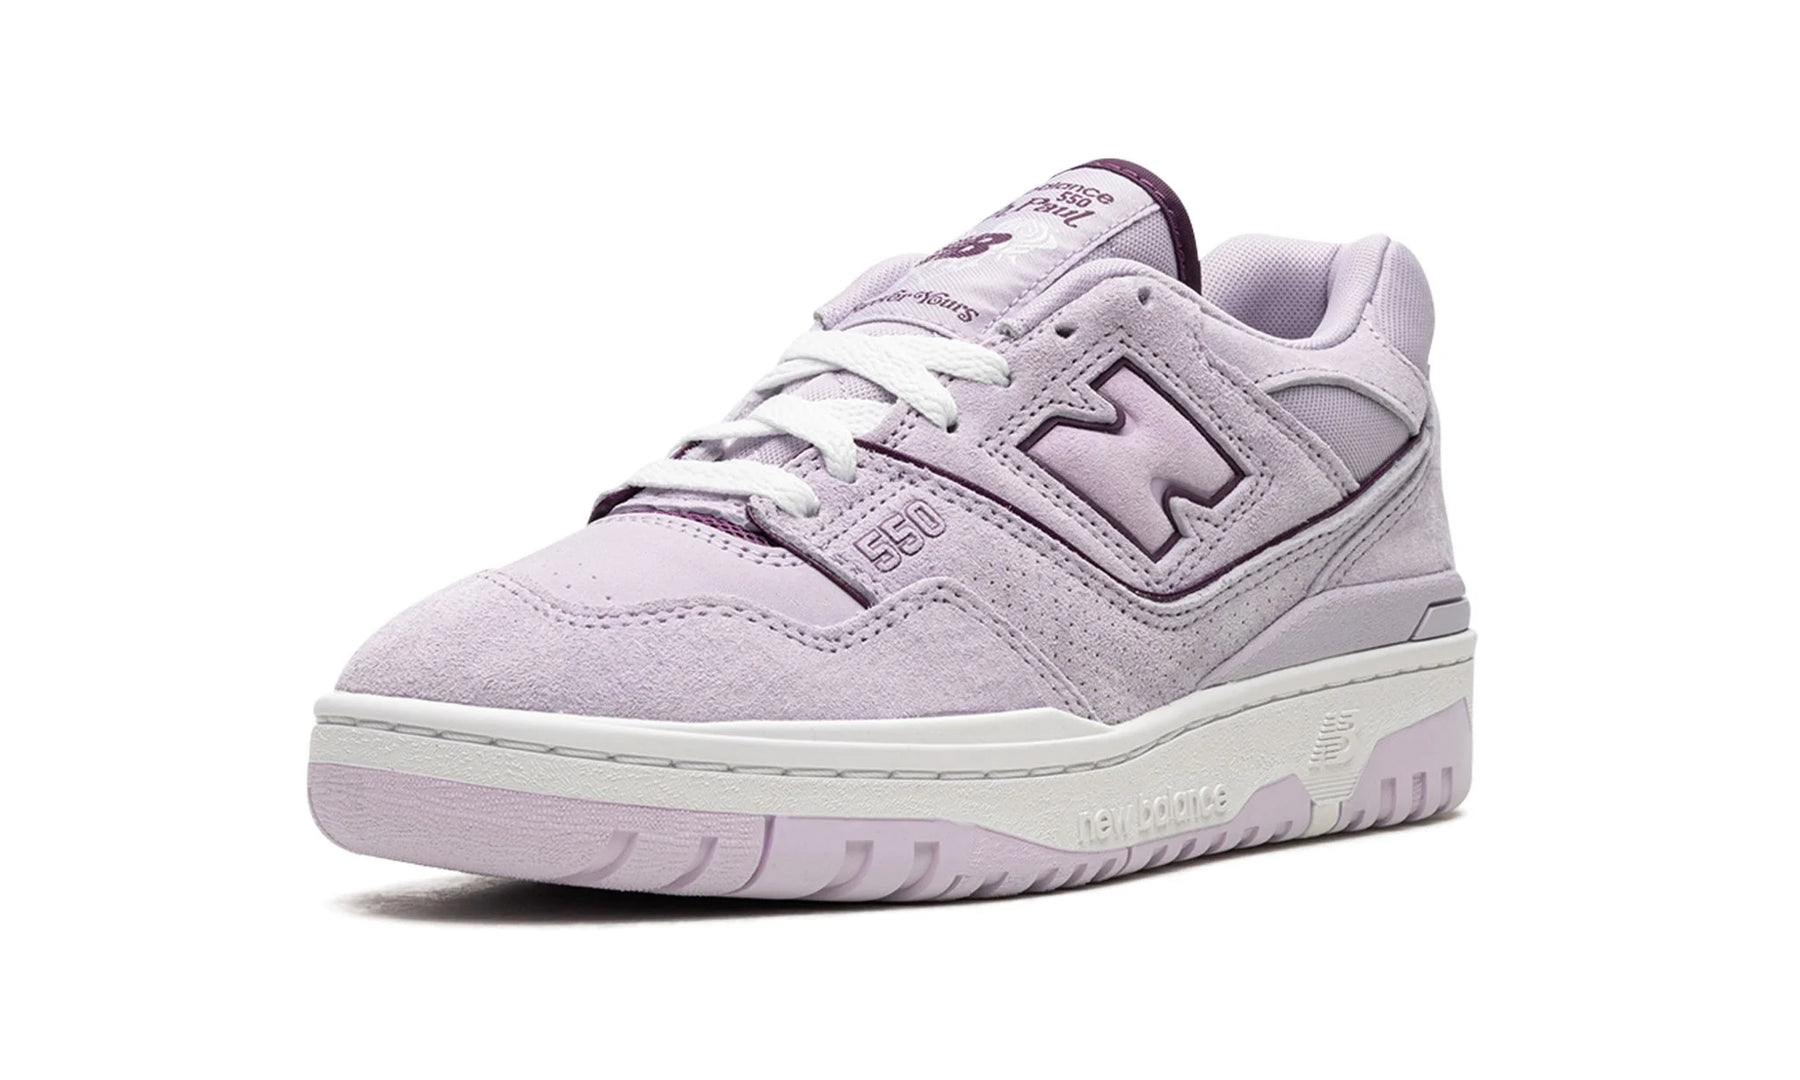 New Balance 550 "Rich Paul - Forever Yours"